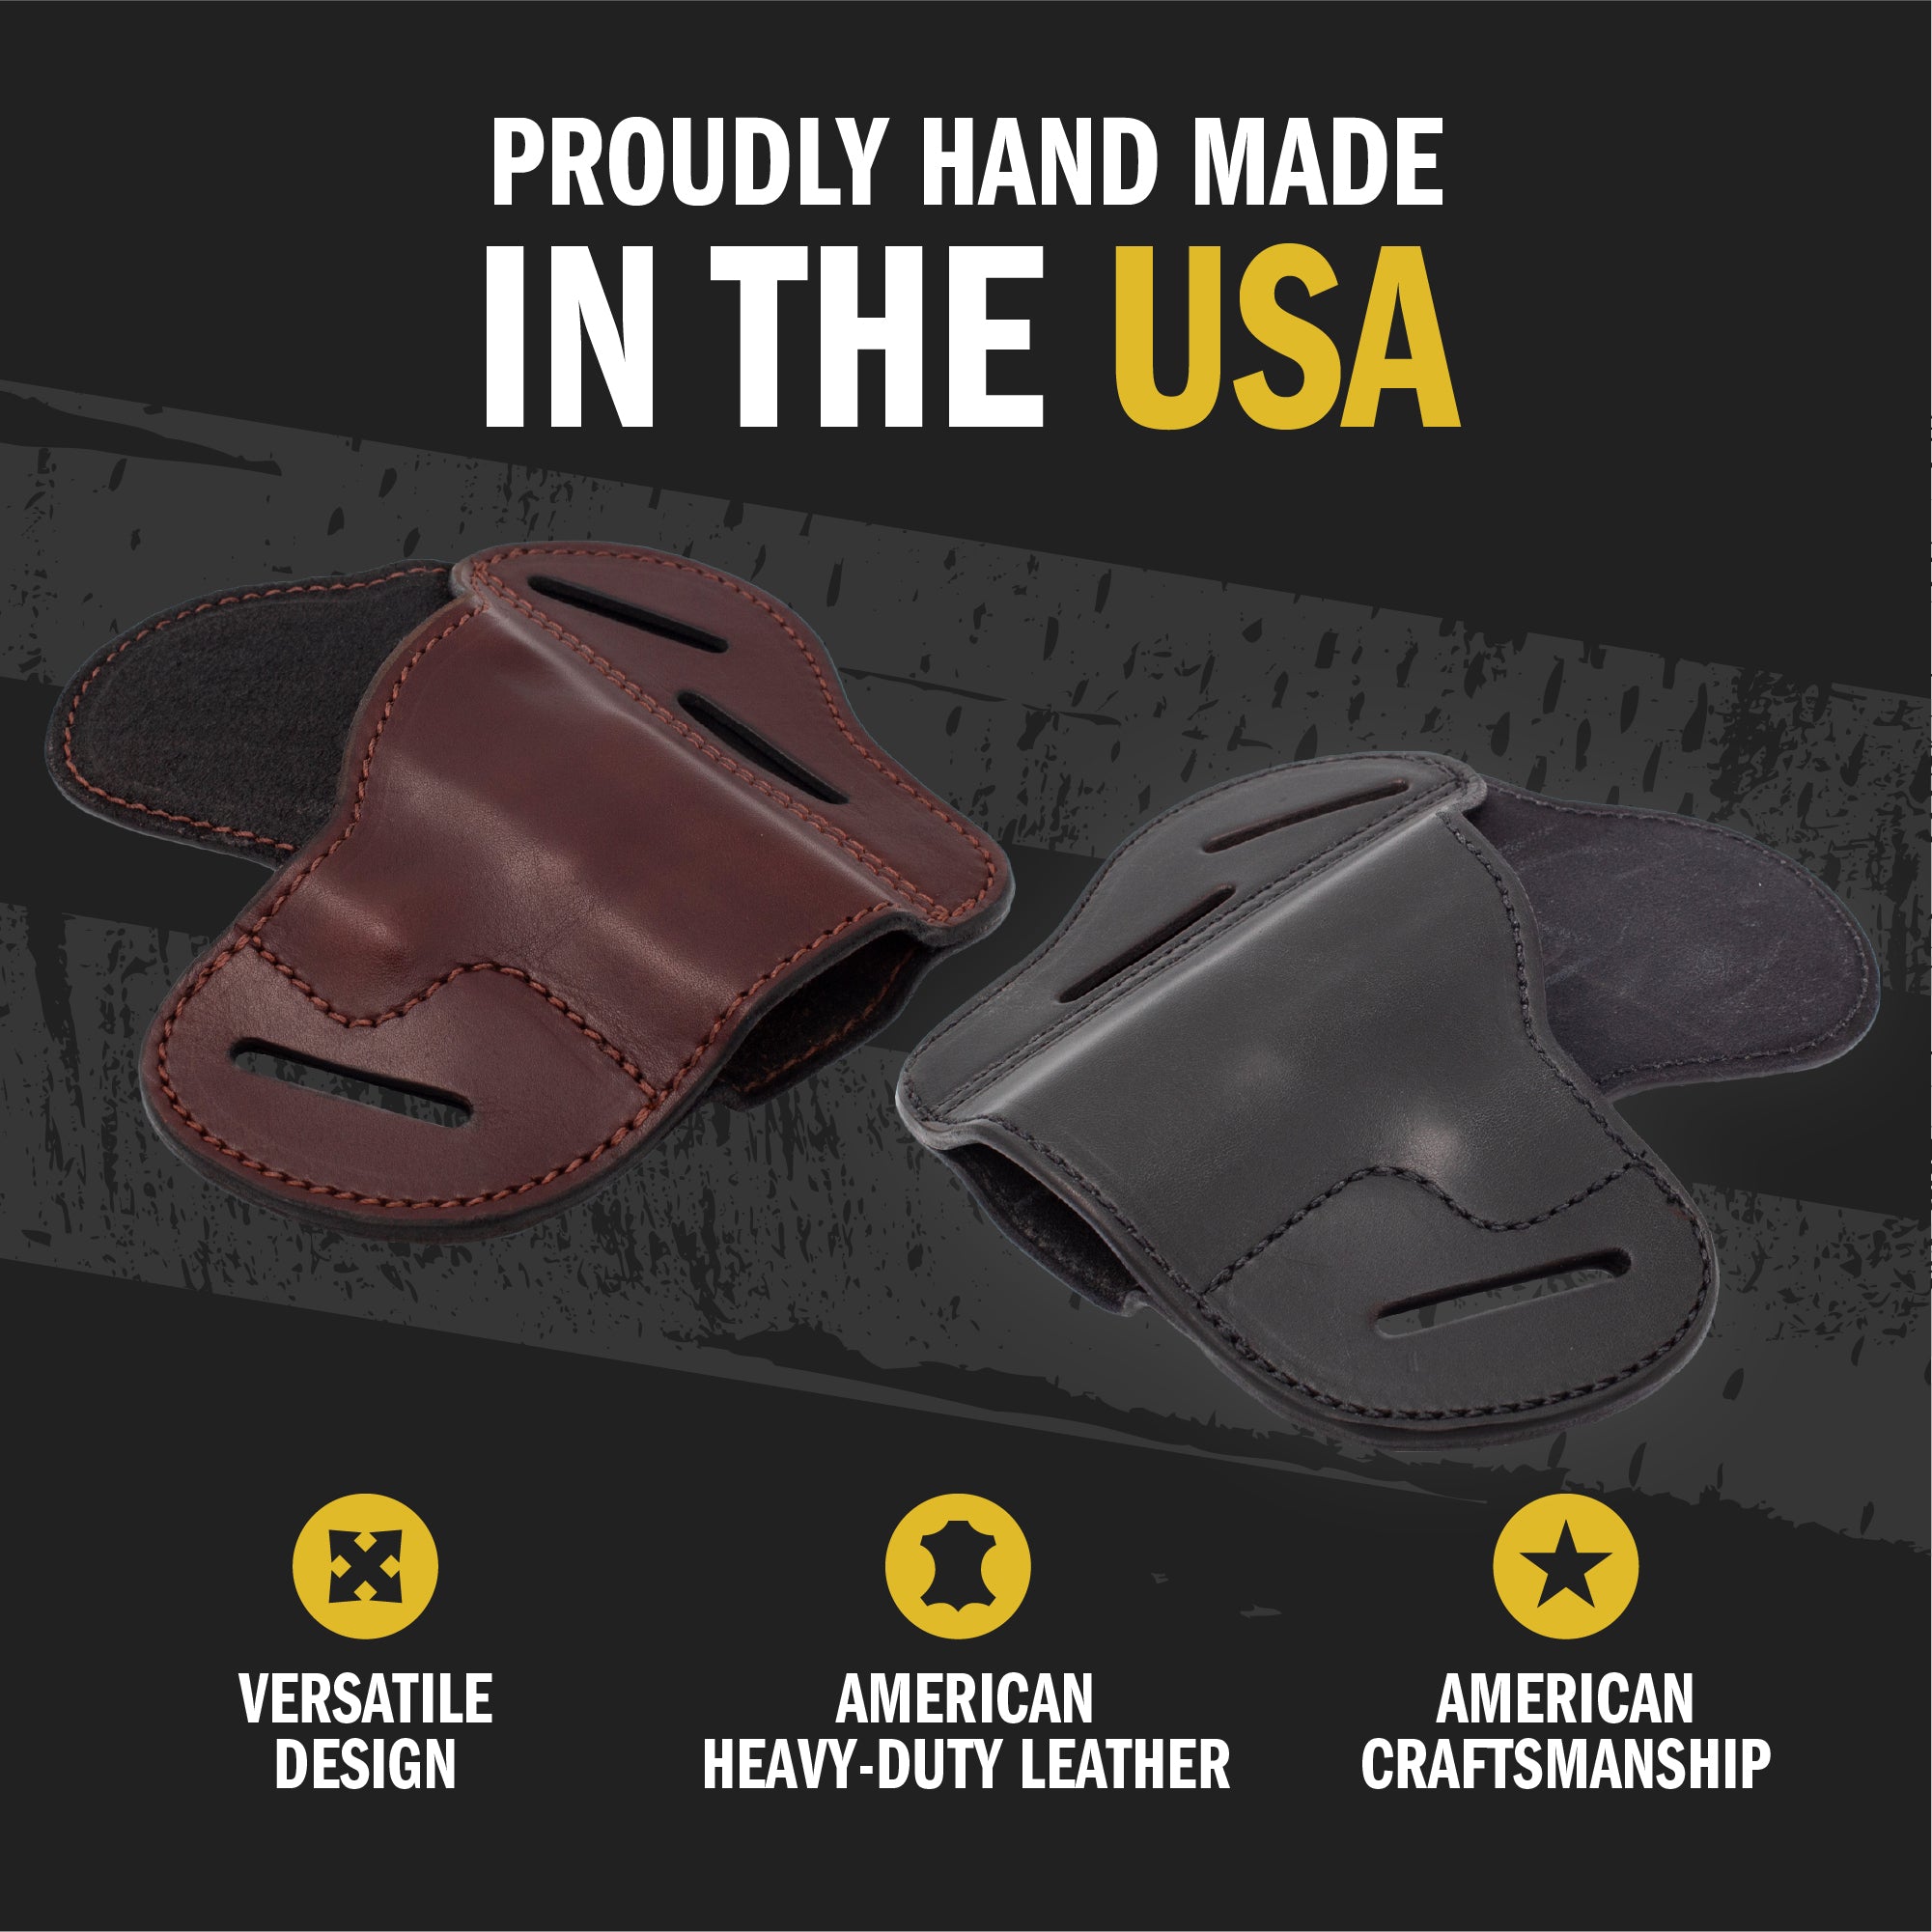 1 Slot 15 Degree Holster Kit Compact Auto/Revolver (7) – Maker's Leather  Supply